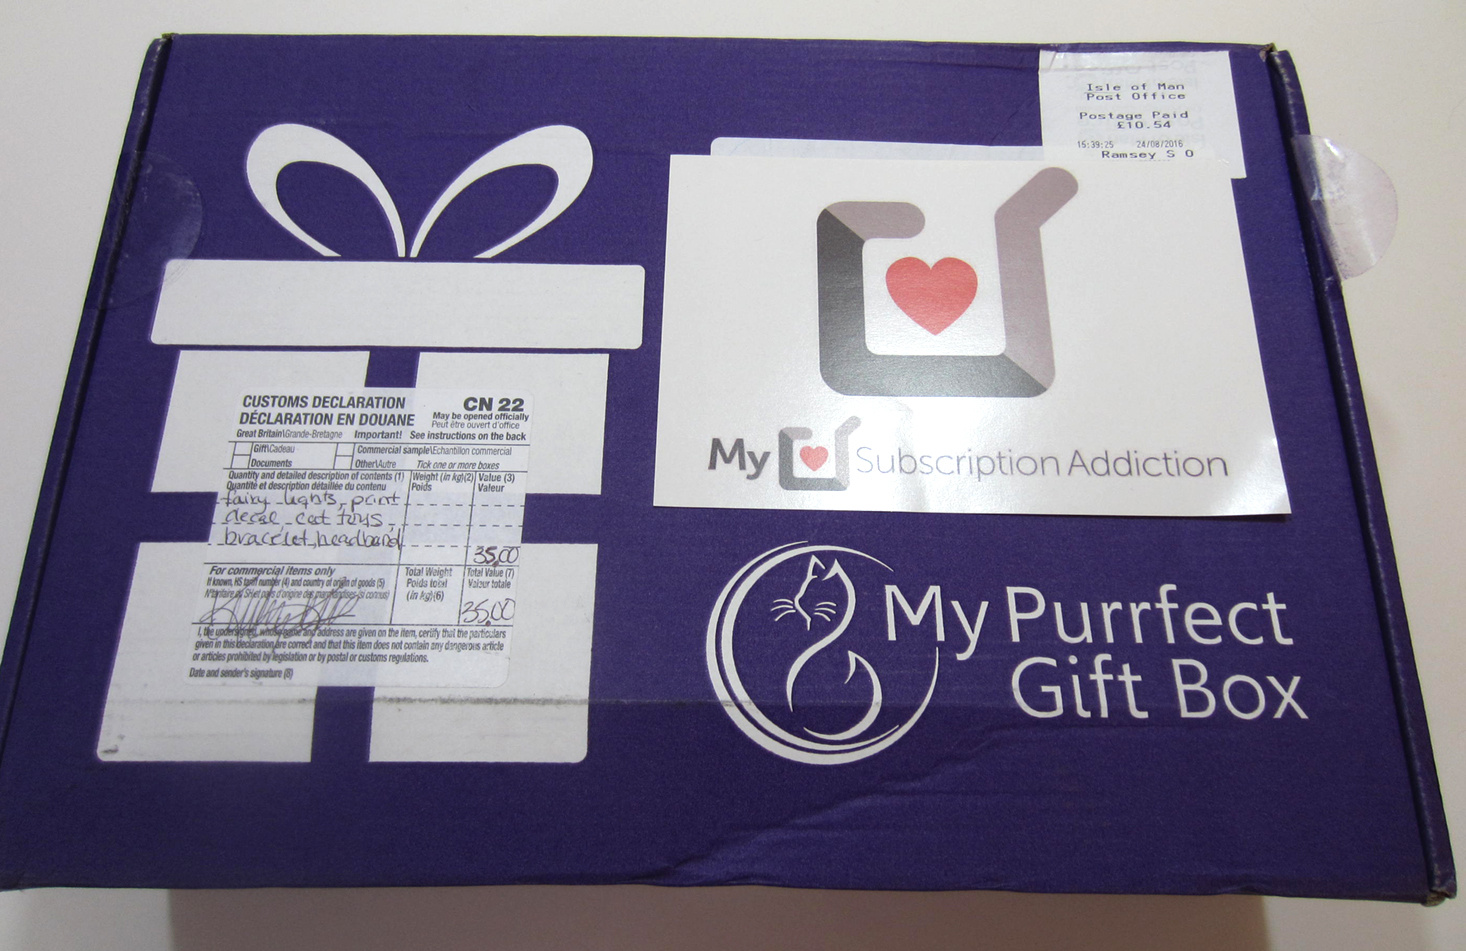 My Purrfect Gift Box Review + Coupon – August 2016